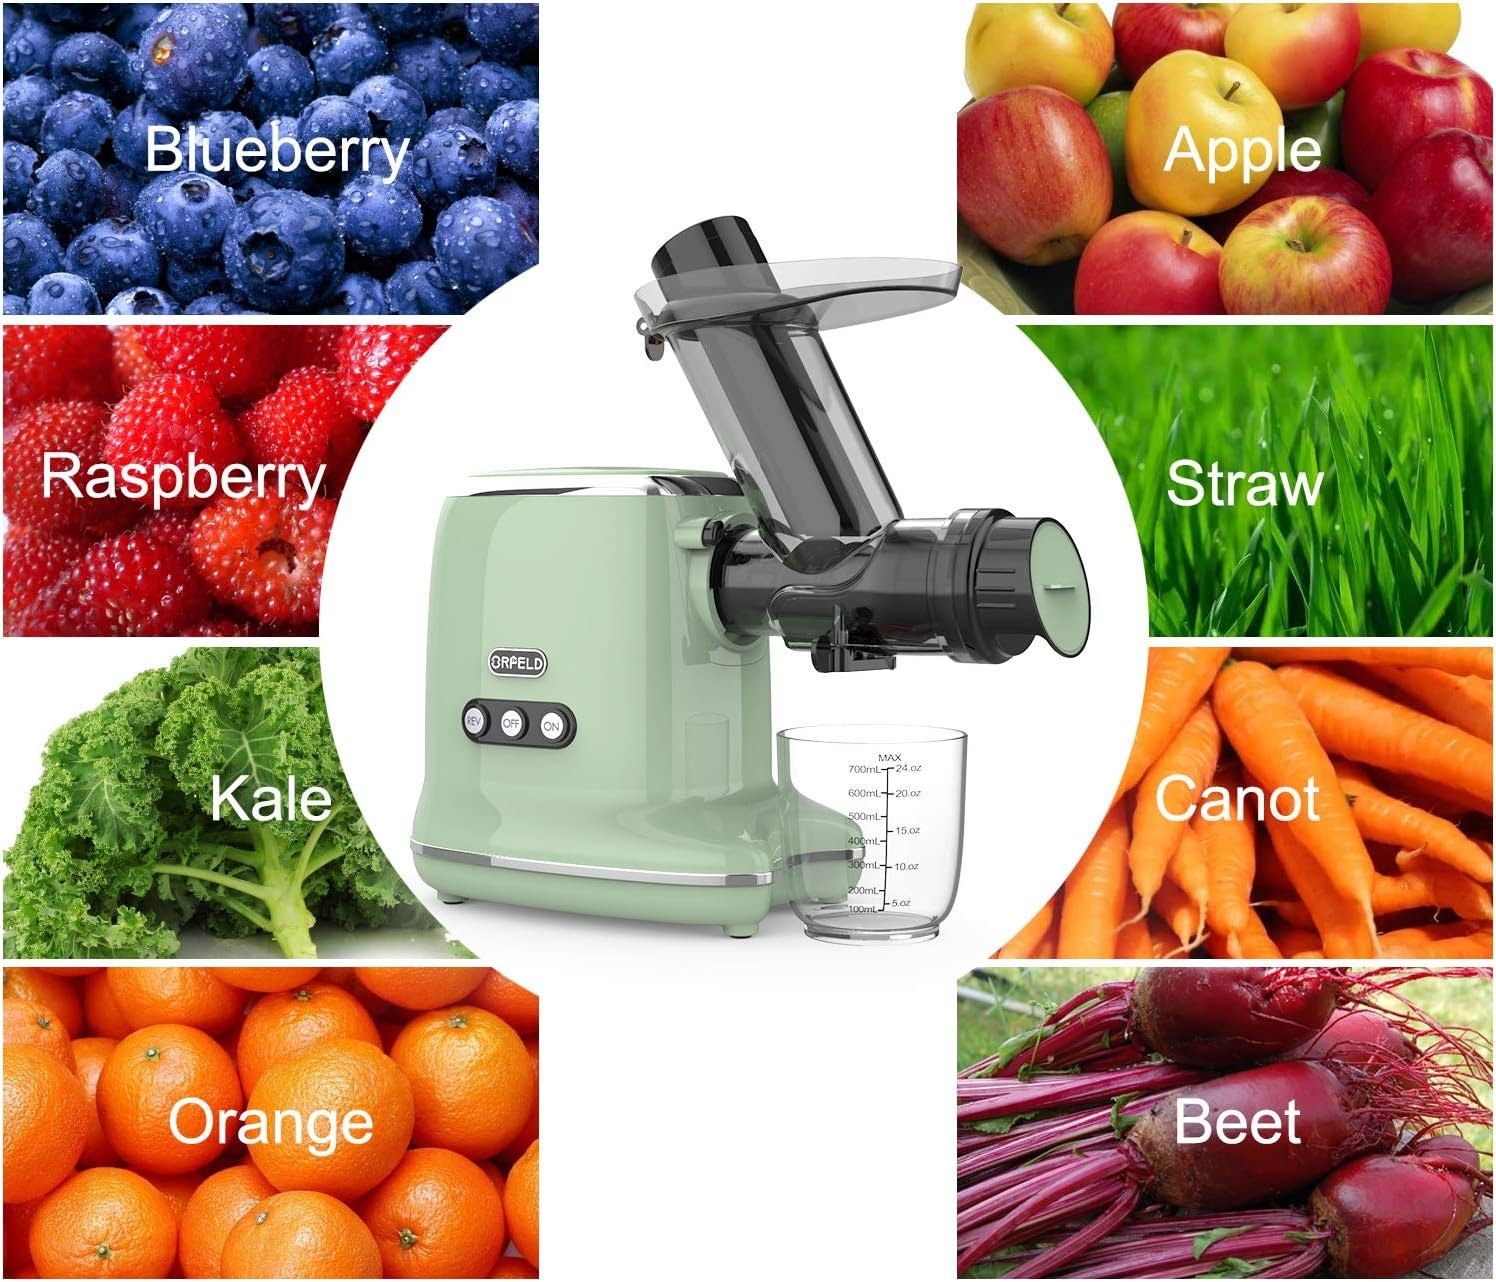 ORFELD Juicer Machines Review